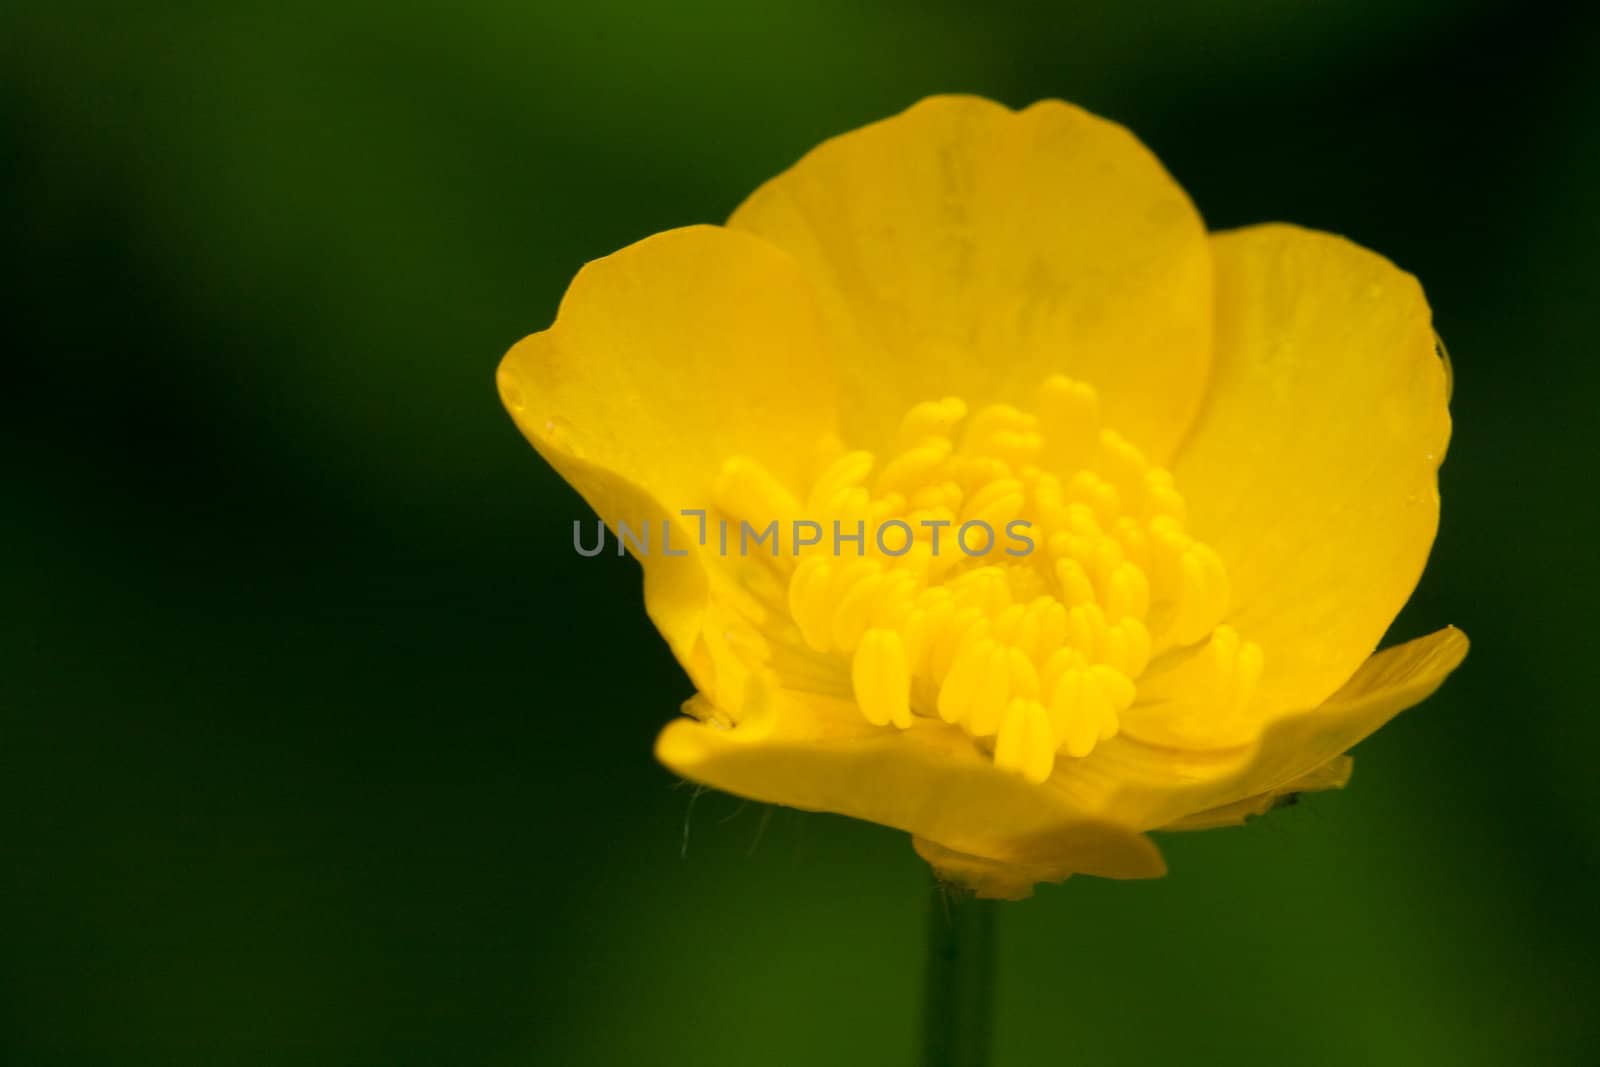 Marsh Marigold on the green background